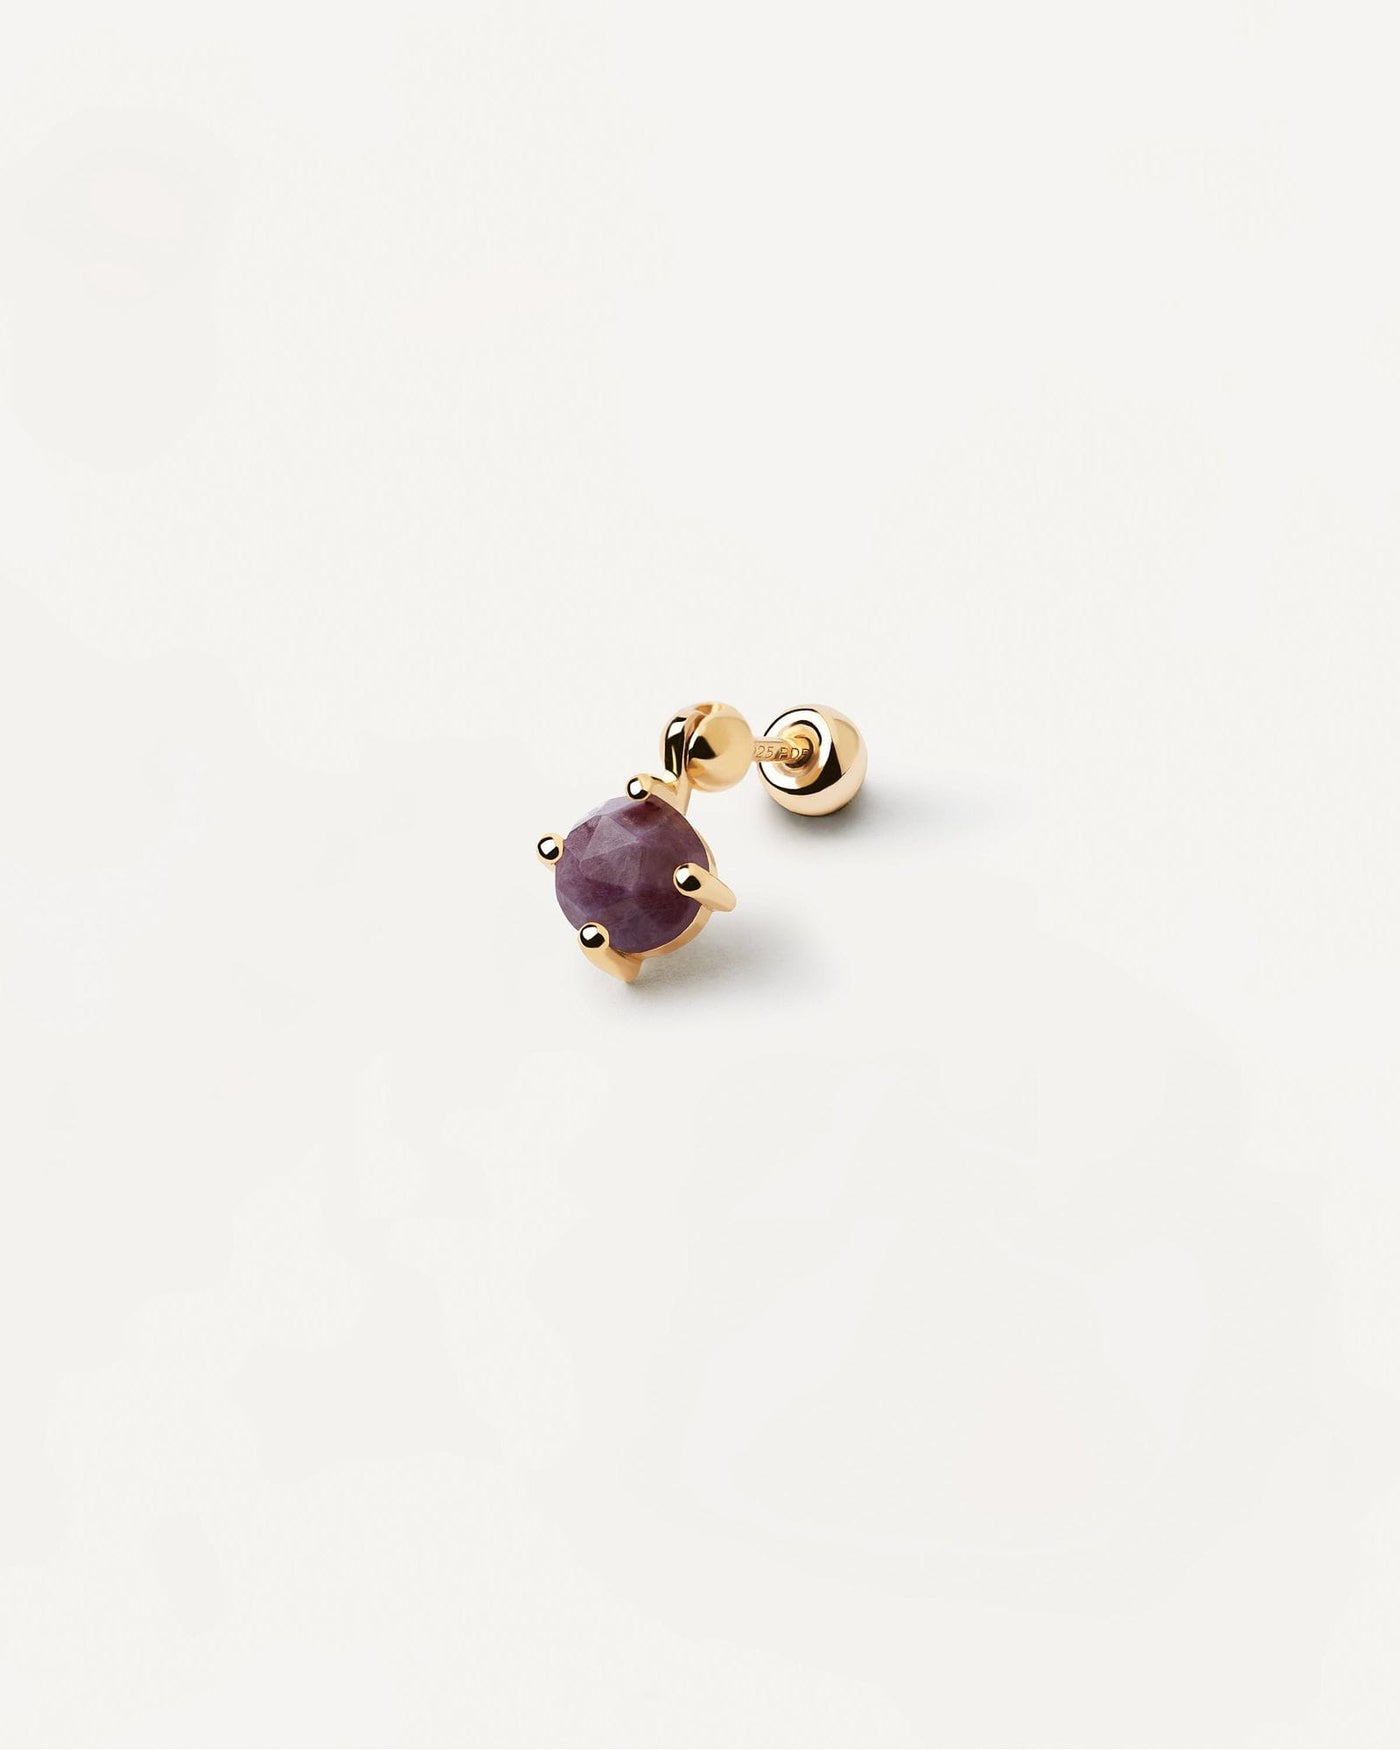 2024 Selection | Kimi Charoite Single Earring. Gold-plated ear piercing with purple gemstone pendant in round cut. Get the latest arrival from PDPAOLA. Place your order safely and get this Best Seller. Free Shipping.